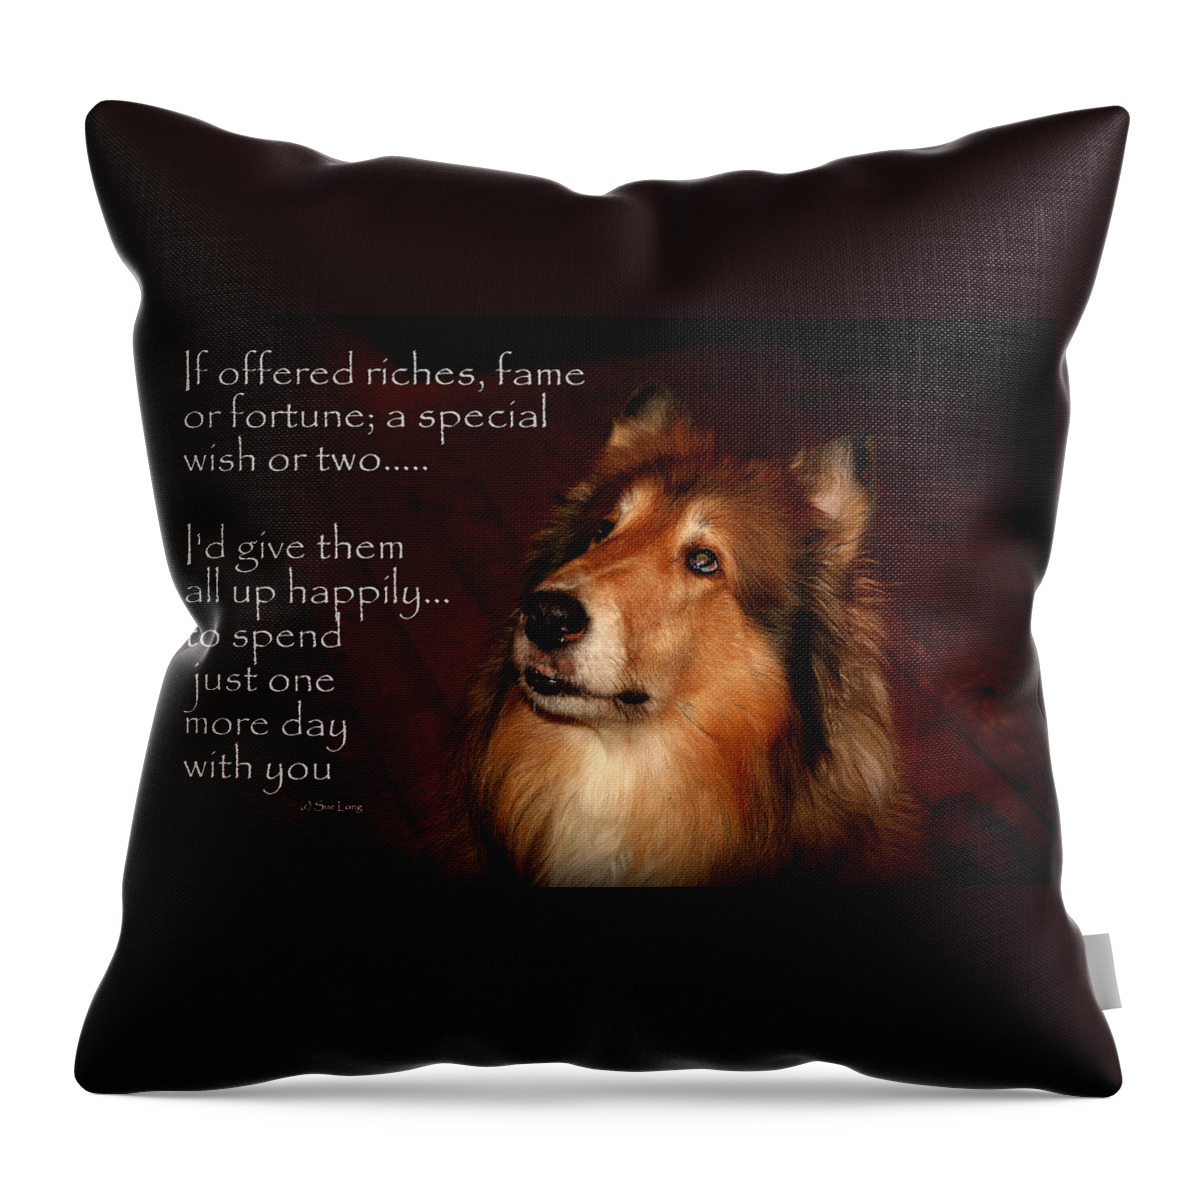 Quote Throw Pillow featuring the photograph Just One More Day by Sue Long